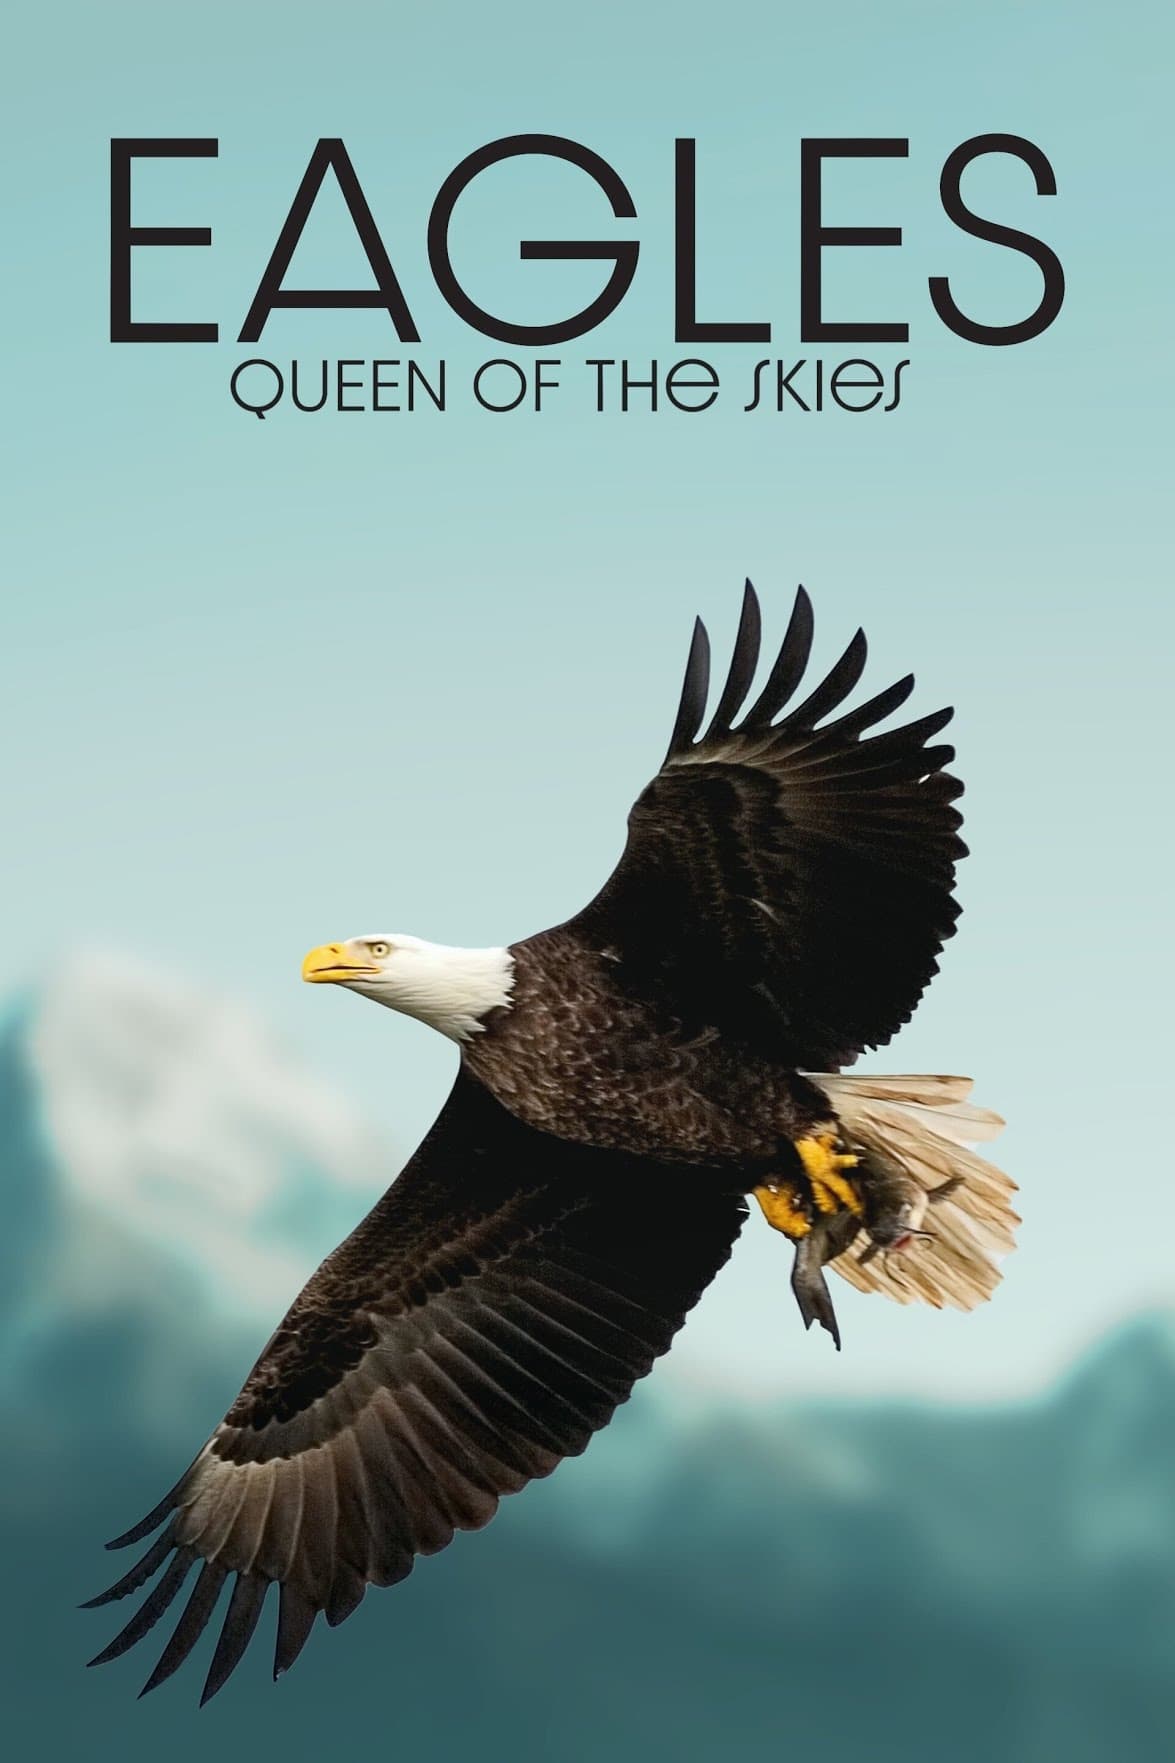 Eagle - Queen of The Skies